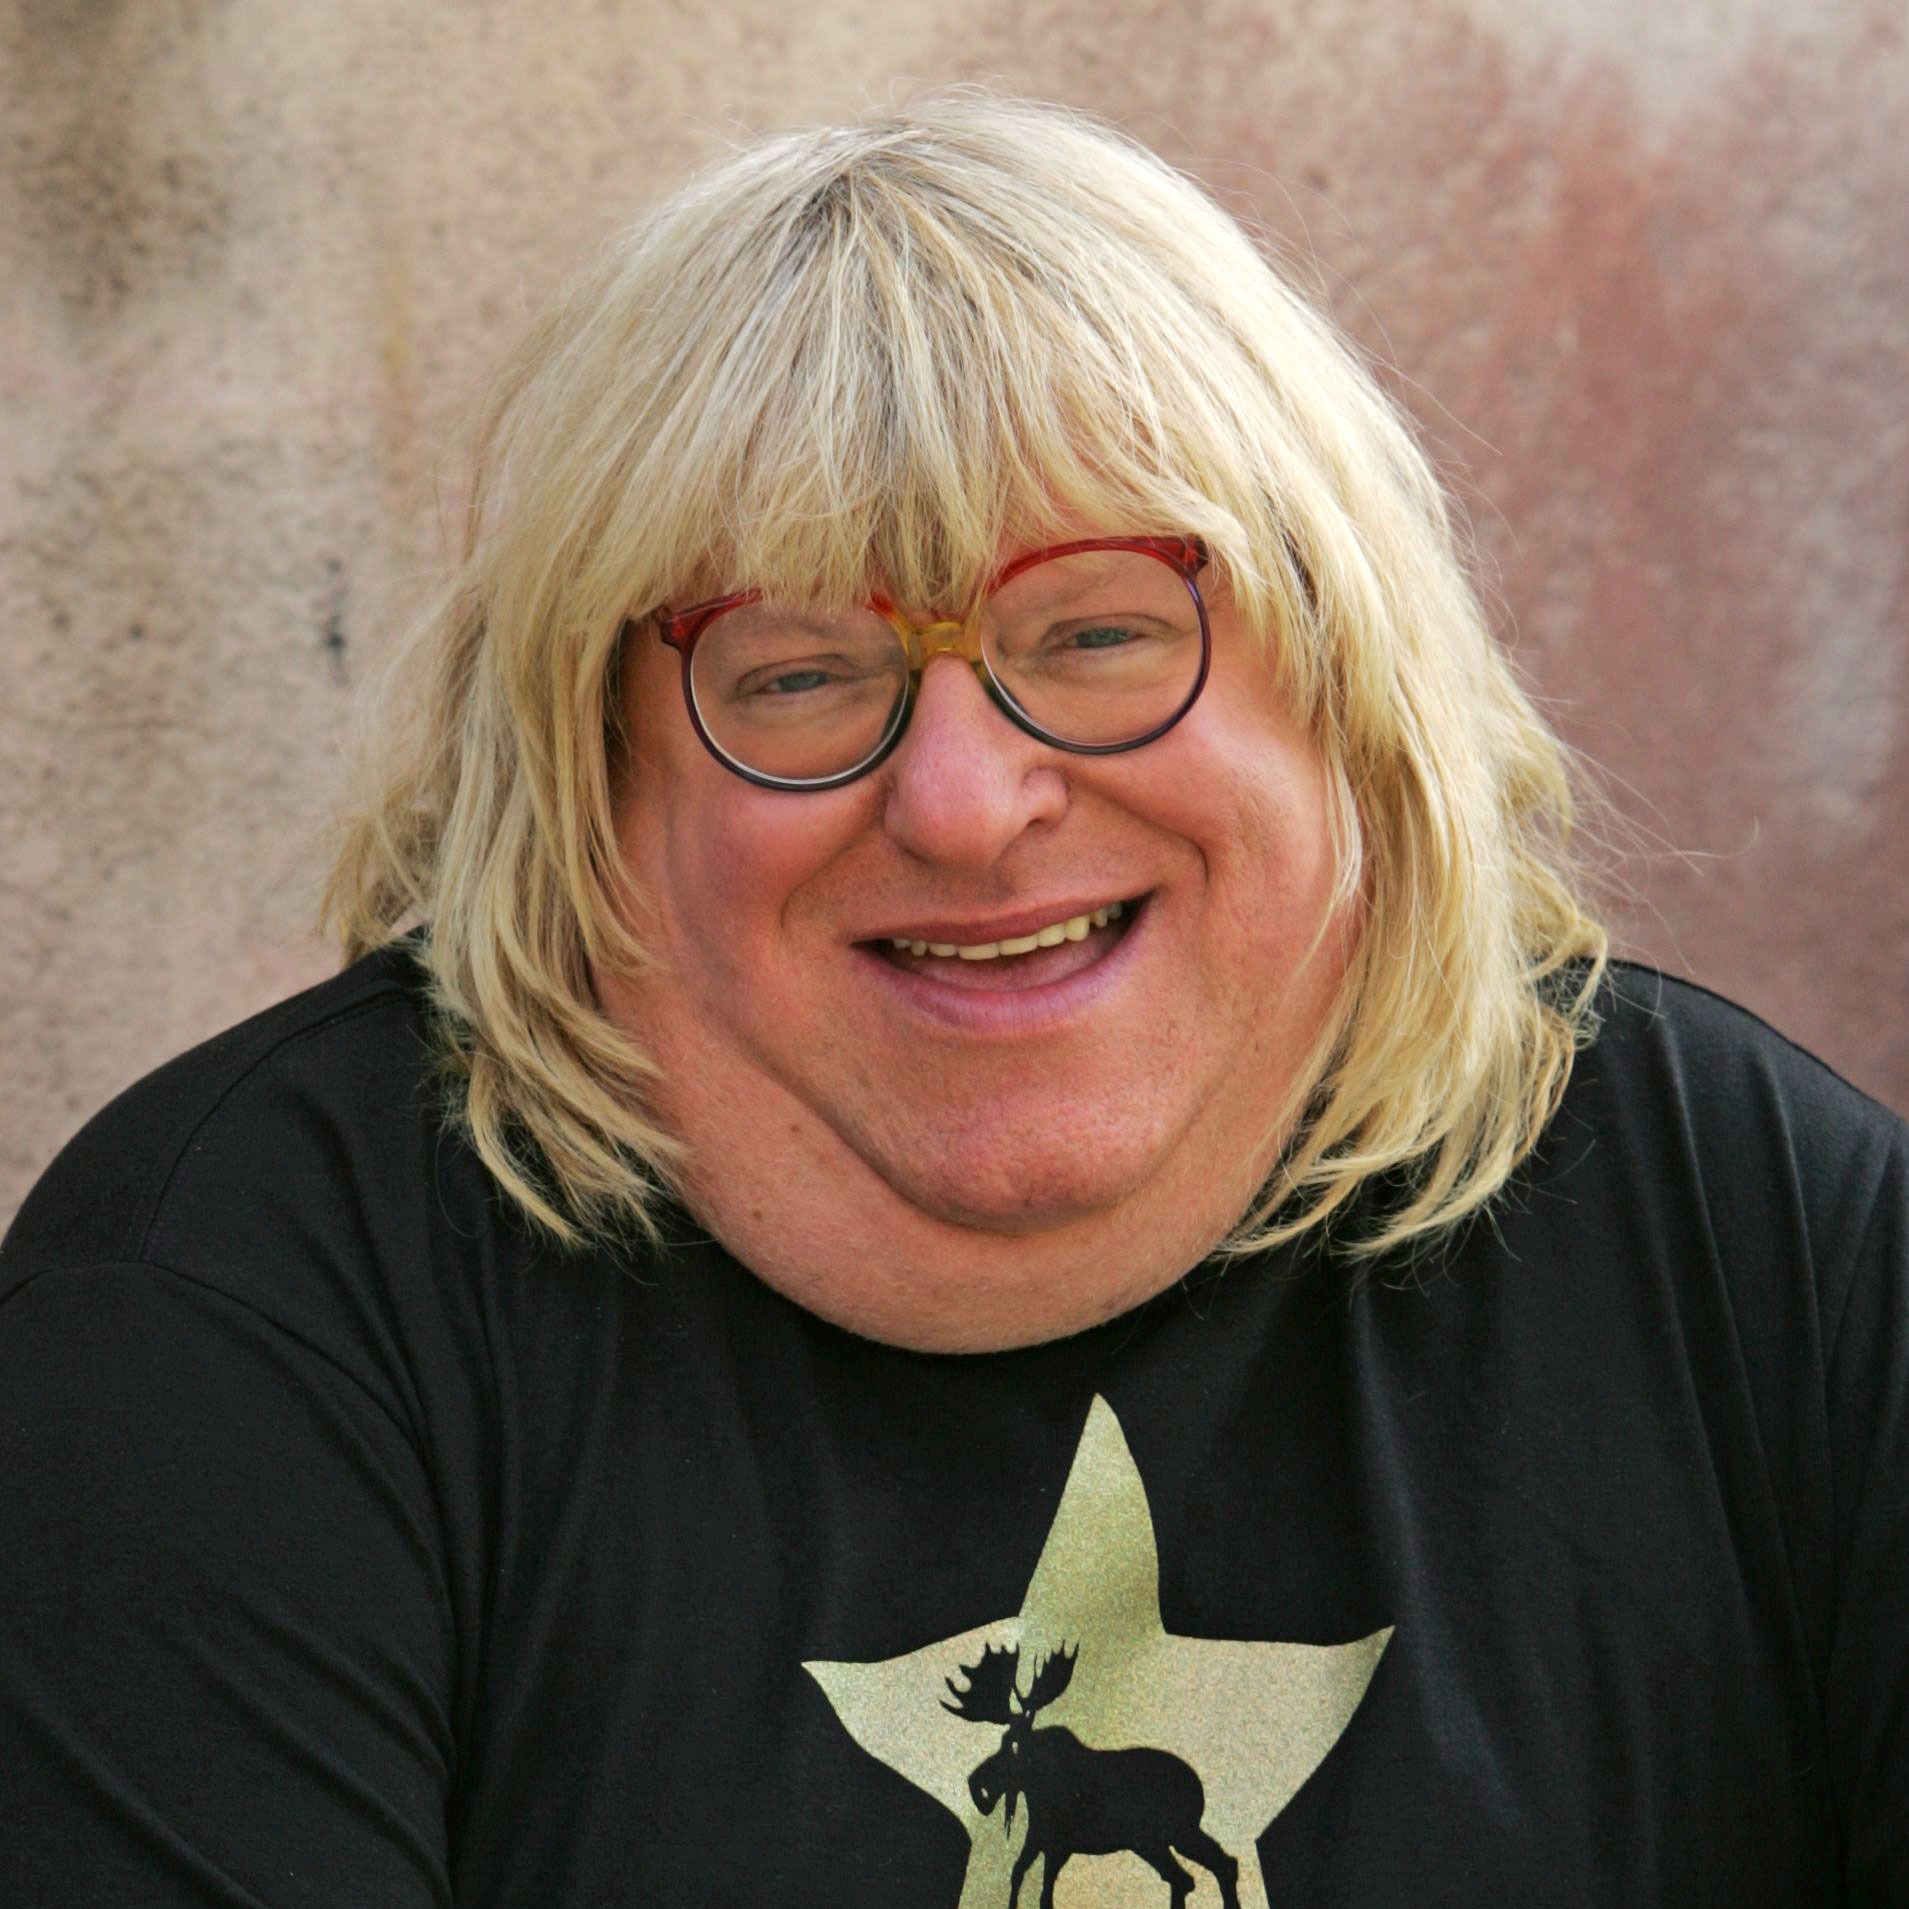 S1 E23 Guests - comedy writer Bruce Vilanch